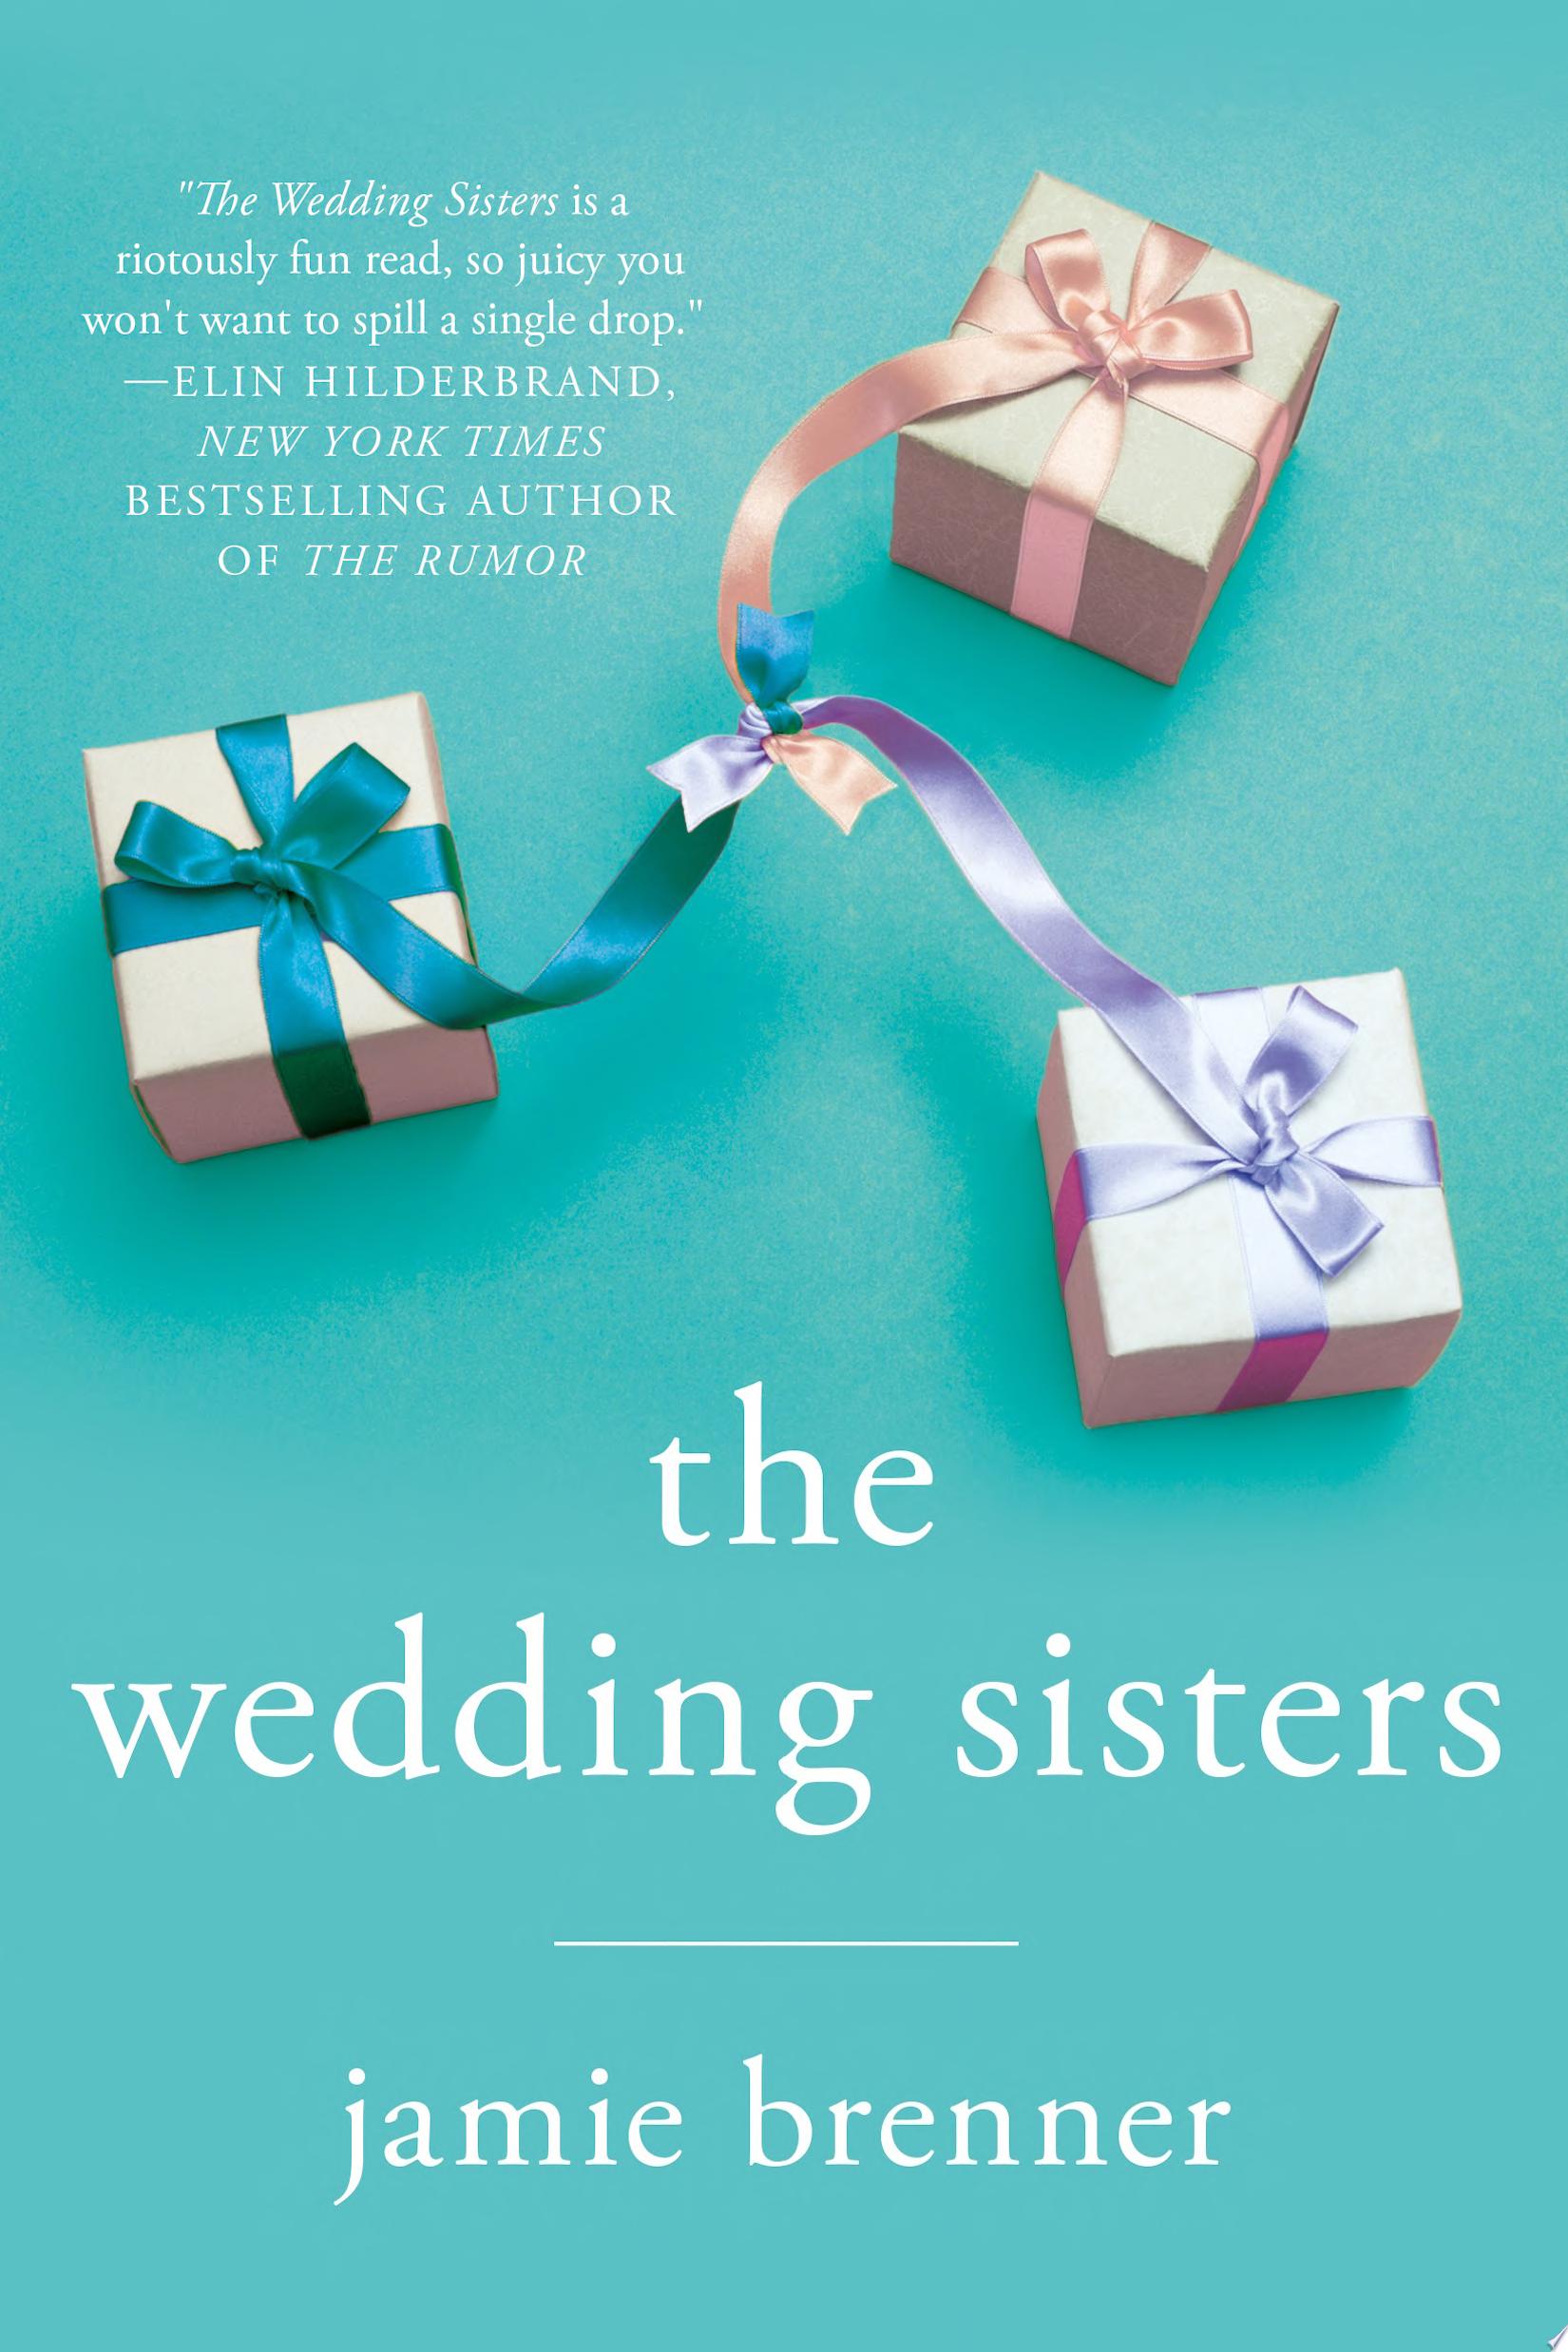 Image for "The Wedding Sisters"